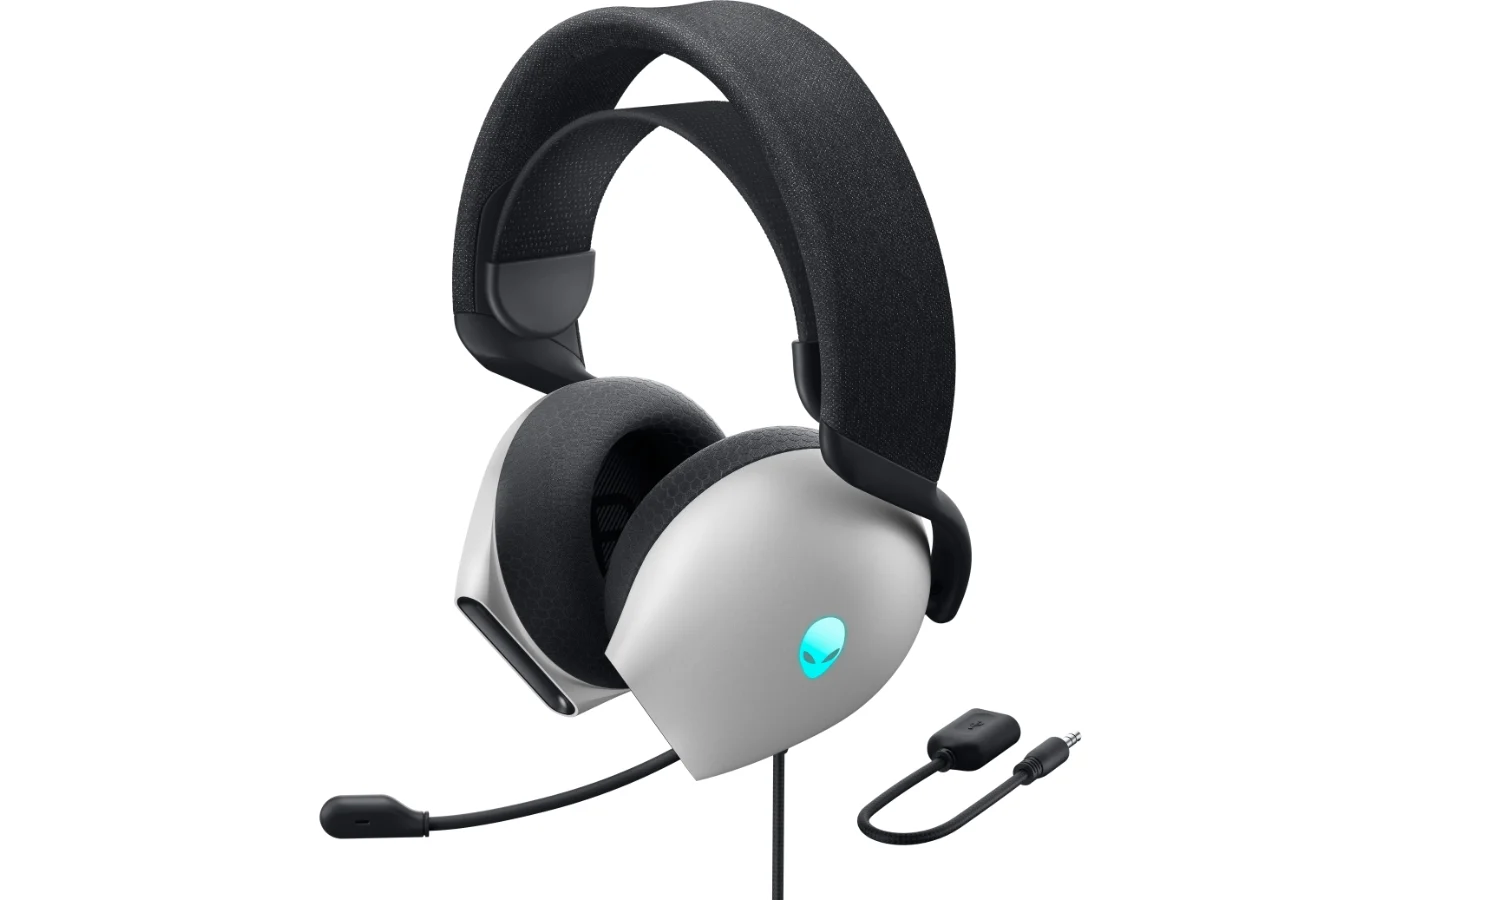 Product photo of the Alienware Wired Gaming Headset, taken from the left-front, with glowing blue alien logo on the left side. White background.